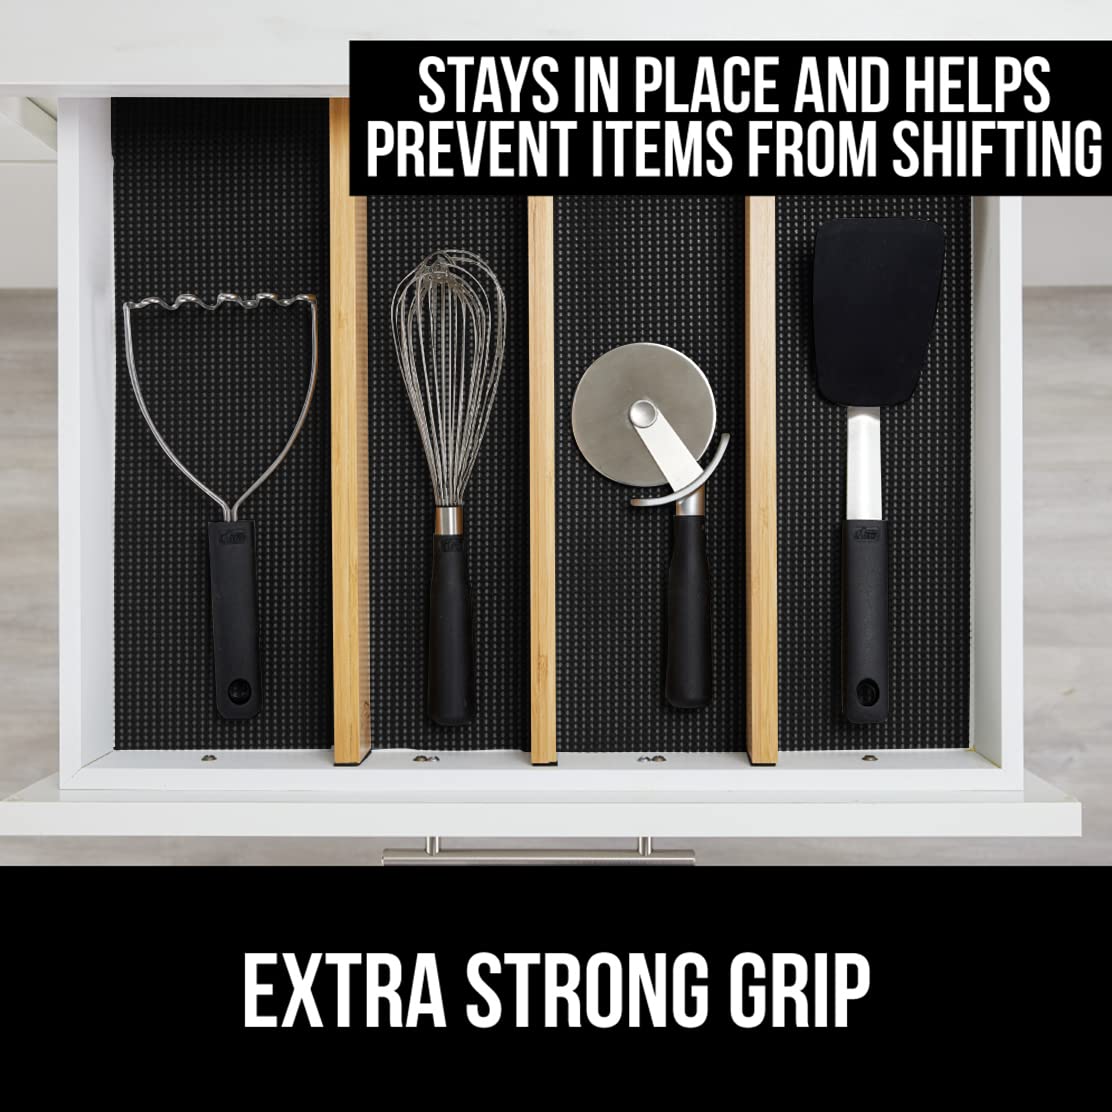 Gorilla Grip Drawer and Shelf Liner and Durable Kitchen Cutting Board, Shelf Liner Size 17.5 in x 10 FT, Strong Grip, Cutting Board Set of 3, Nonslip Handle and Border, Both in Black, 2 Item Bundle